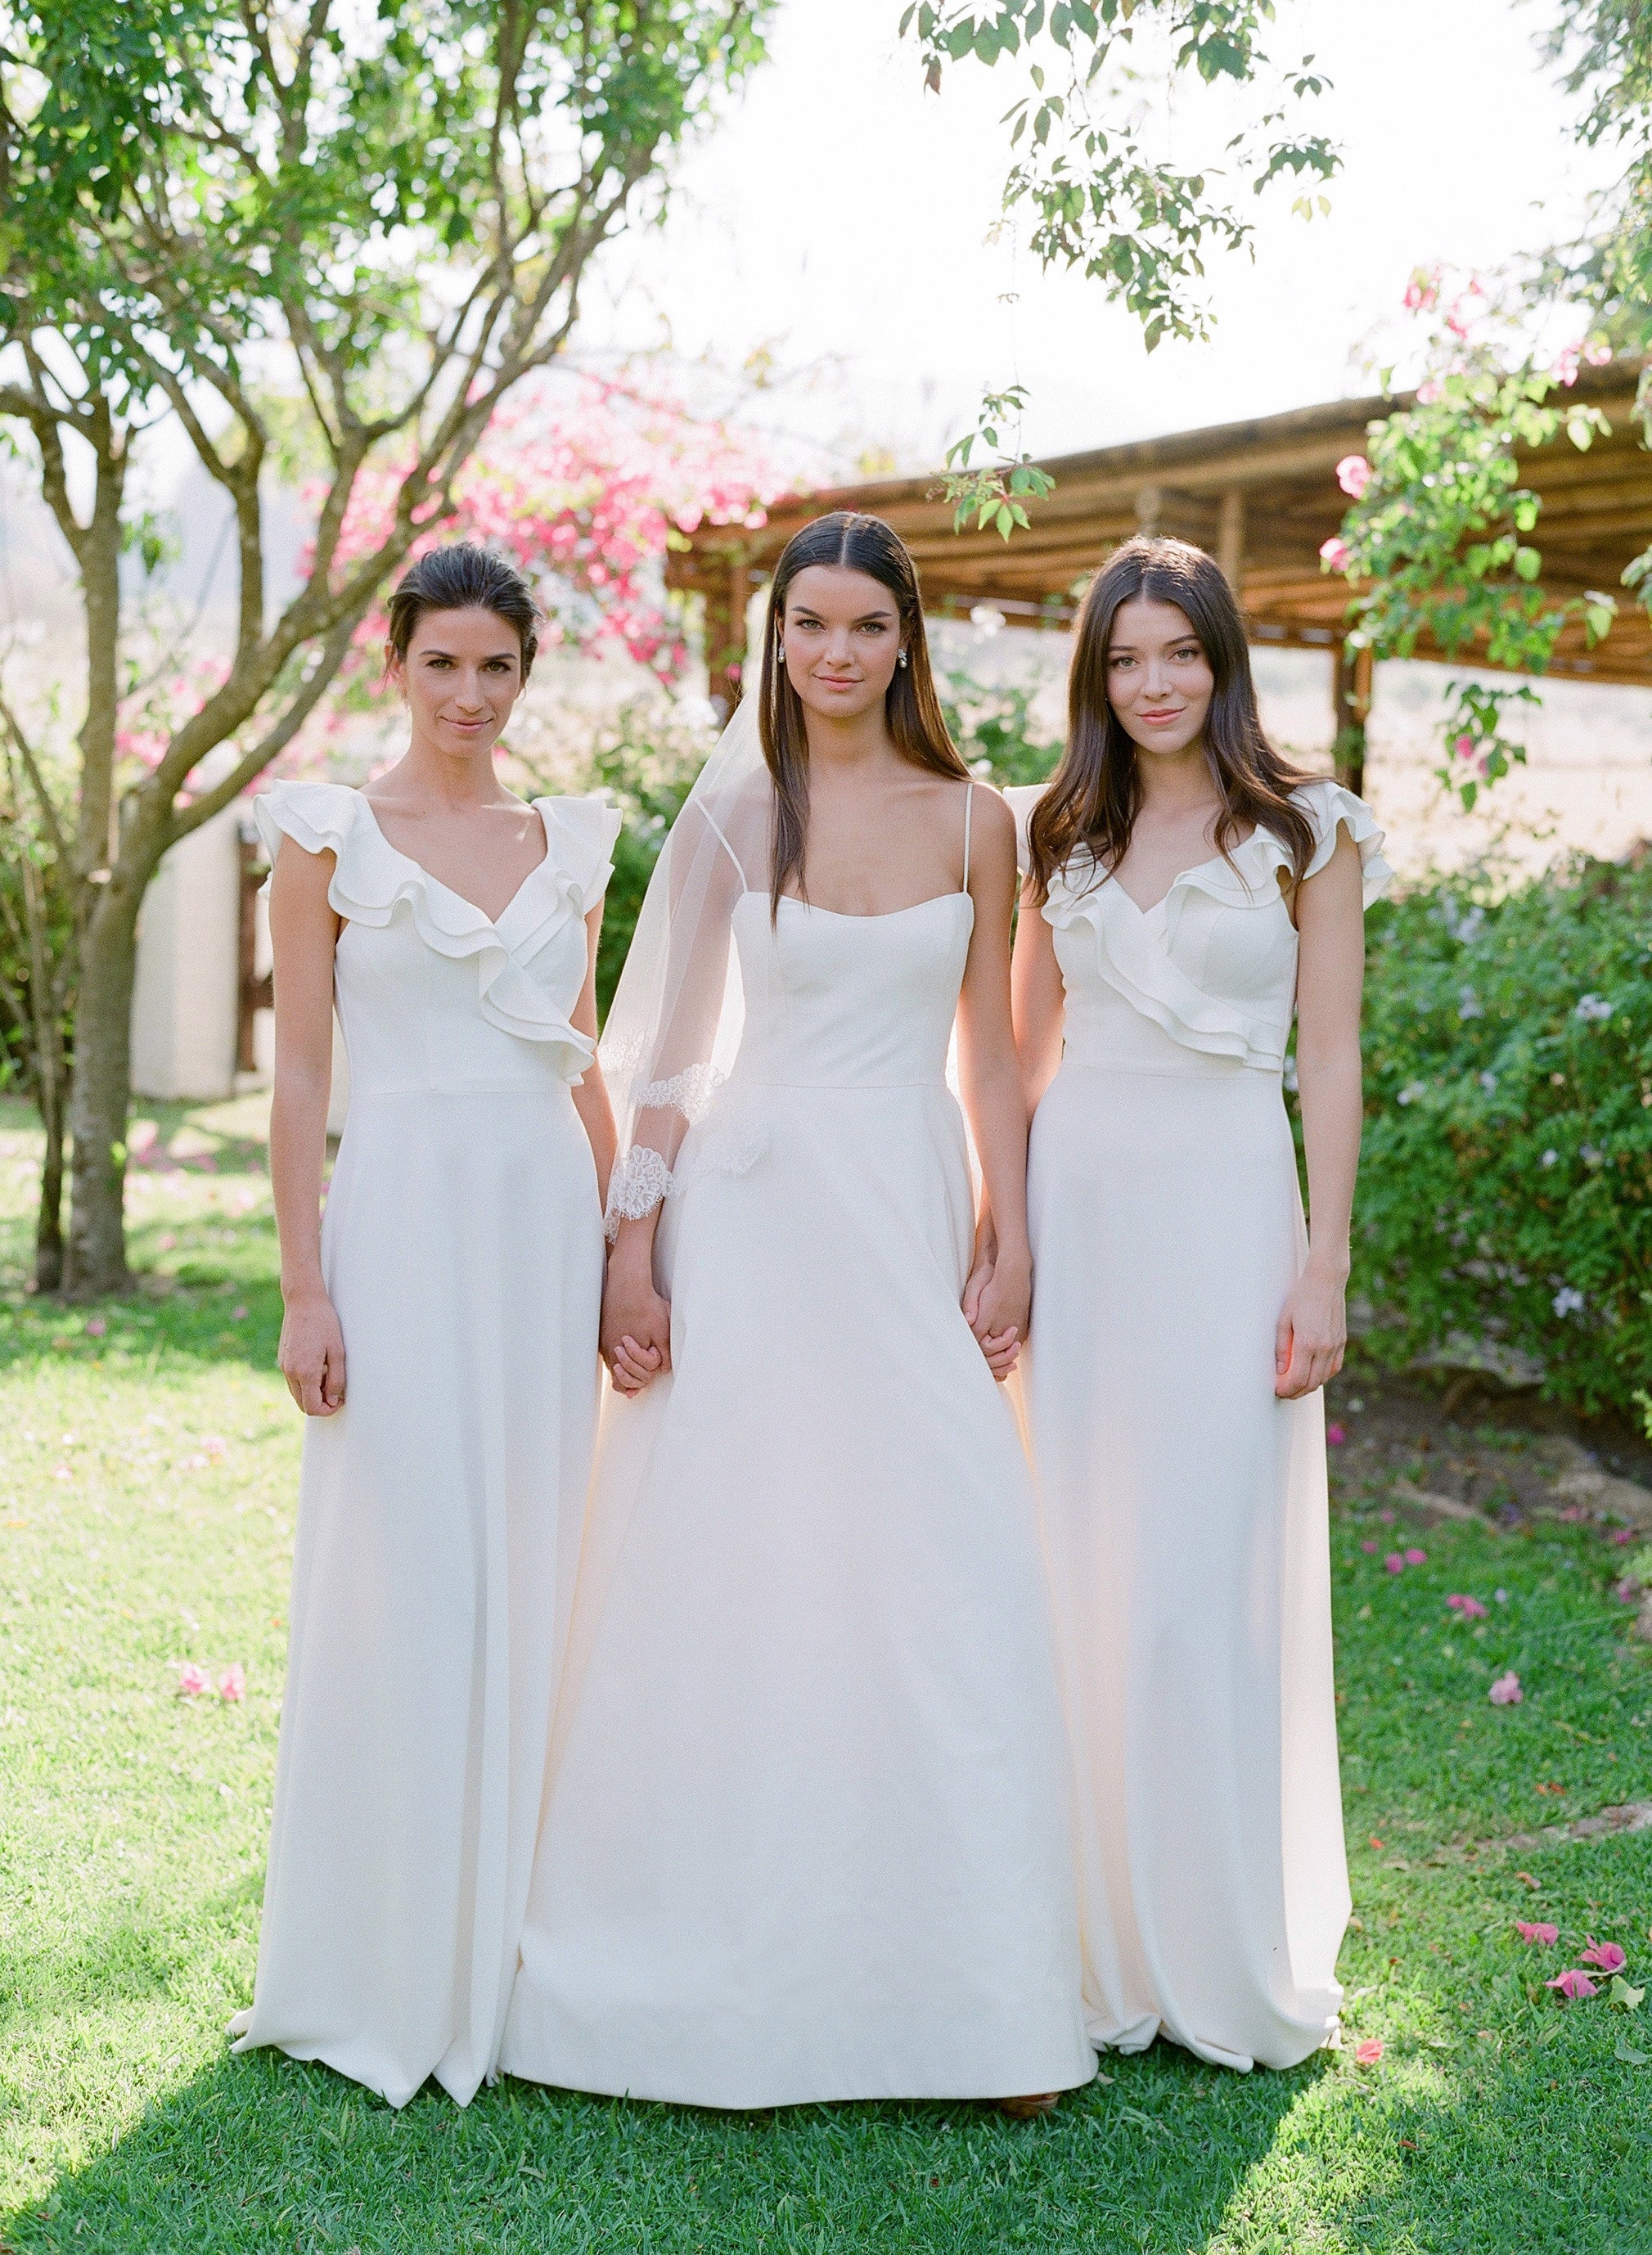 #KleinfeldEditorial We took our newest wedding dresses, bridesmaids dresses and flower girl dresses from Kleinfeld Bridal and Kleinfeld Bridal Party down to the Hacienda San Antonio in Colima Mexico for a stunning editorial photoshoot—here is all the destination wedding venue inspiration you need!